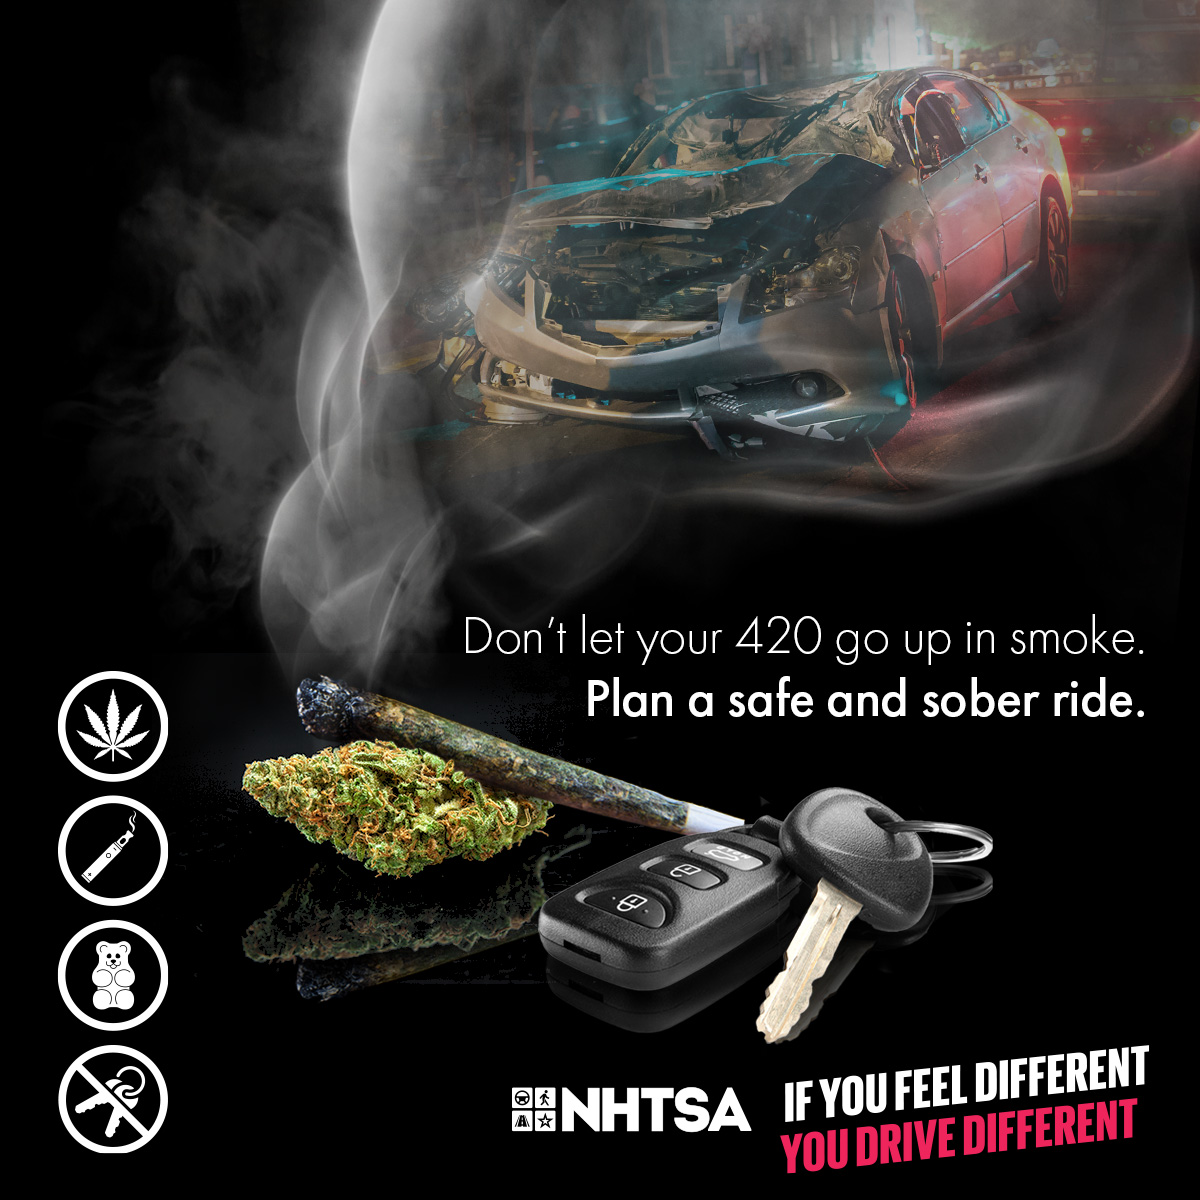 How to drive safely isn’t one of life’s great mysteries … If you’re impaired, don’t get behind the wheel. If You Feel Different, You Drive Different. #ImpairedDriving #420